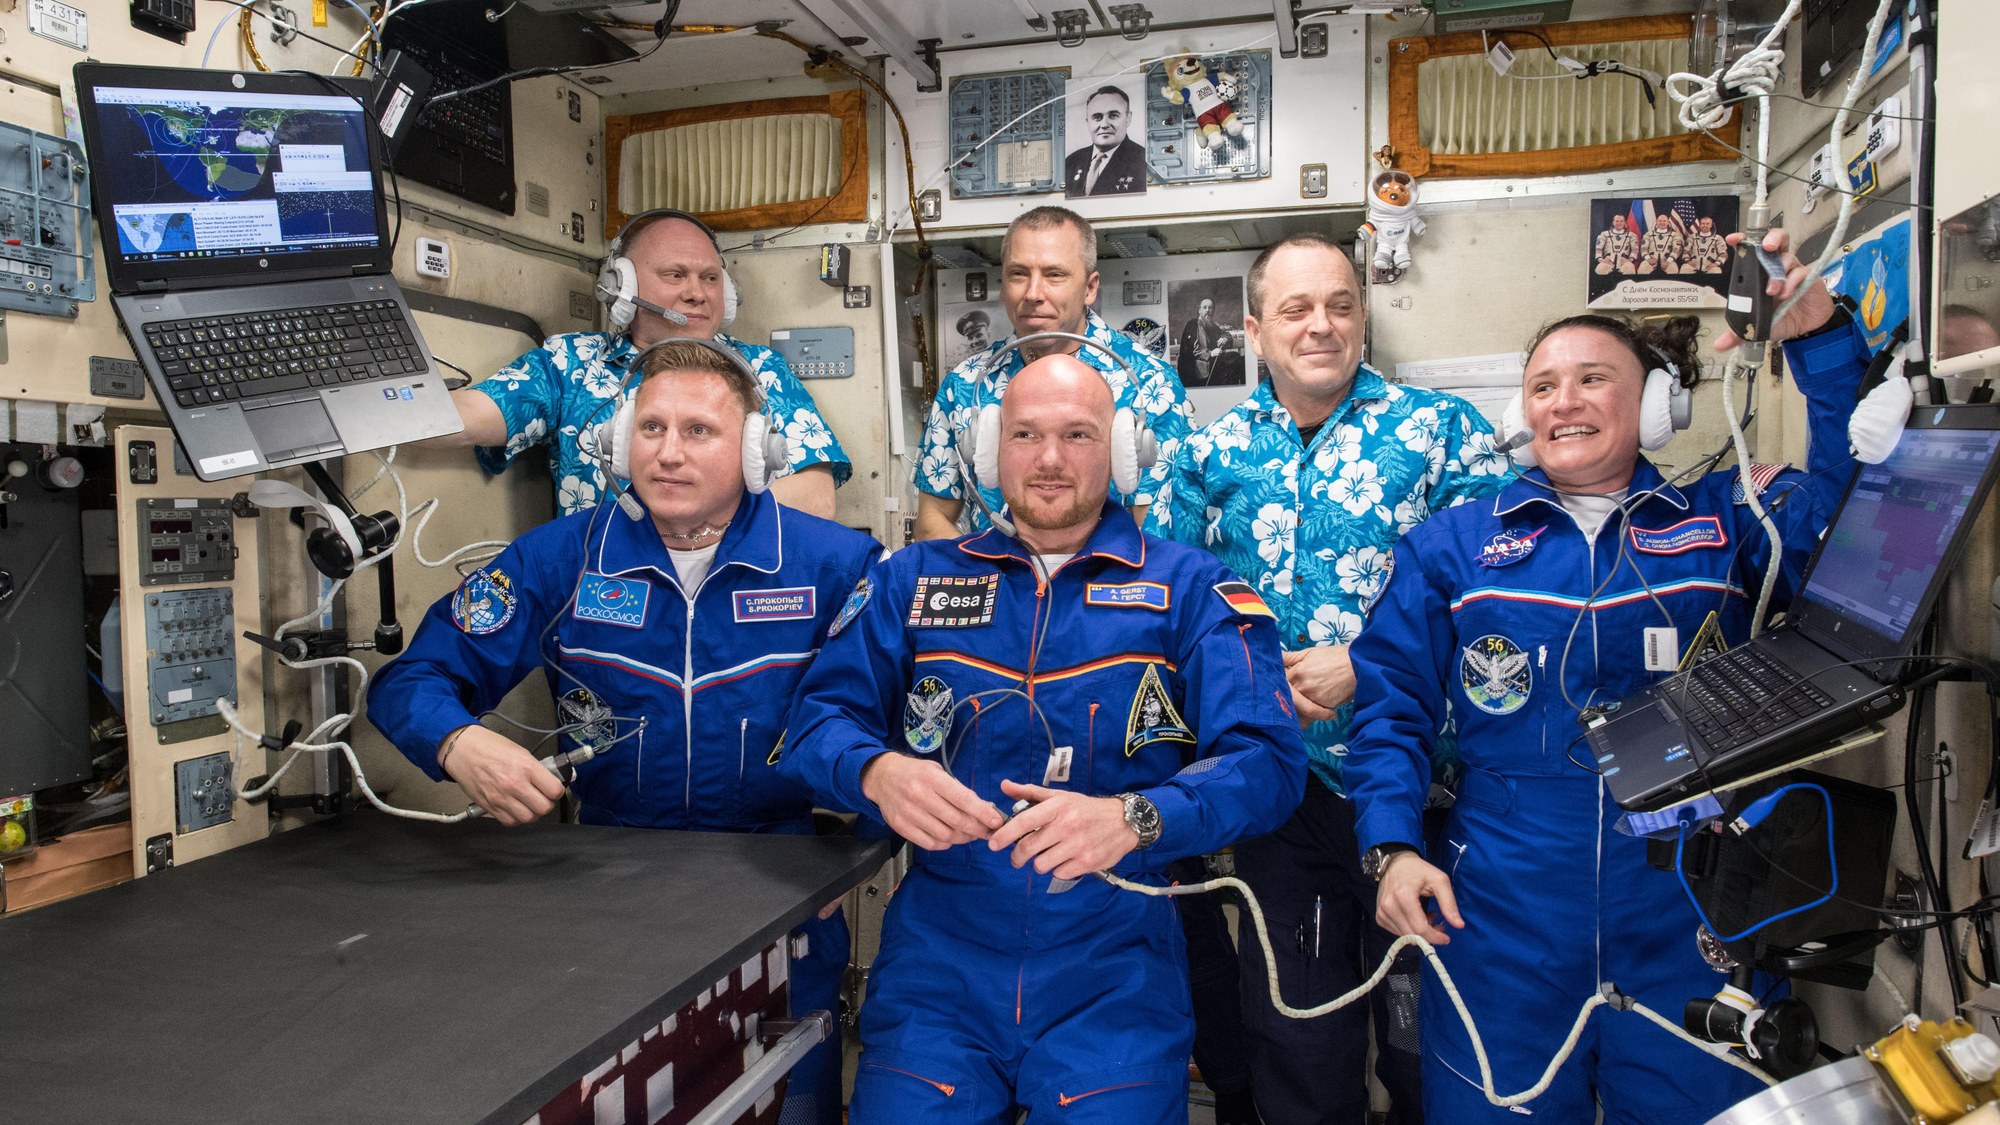 The Expedition 56 crew on the ISS